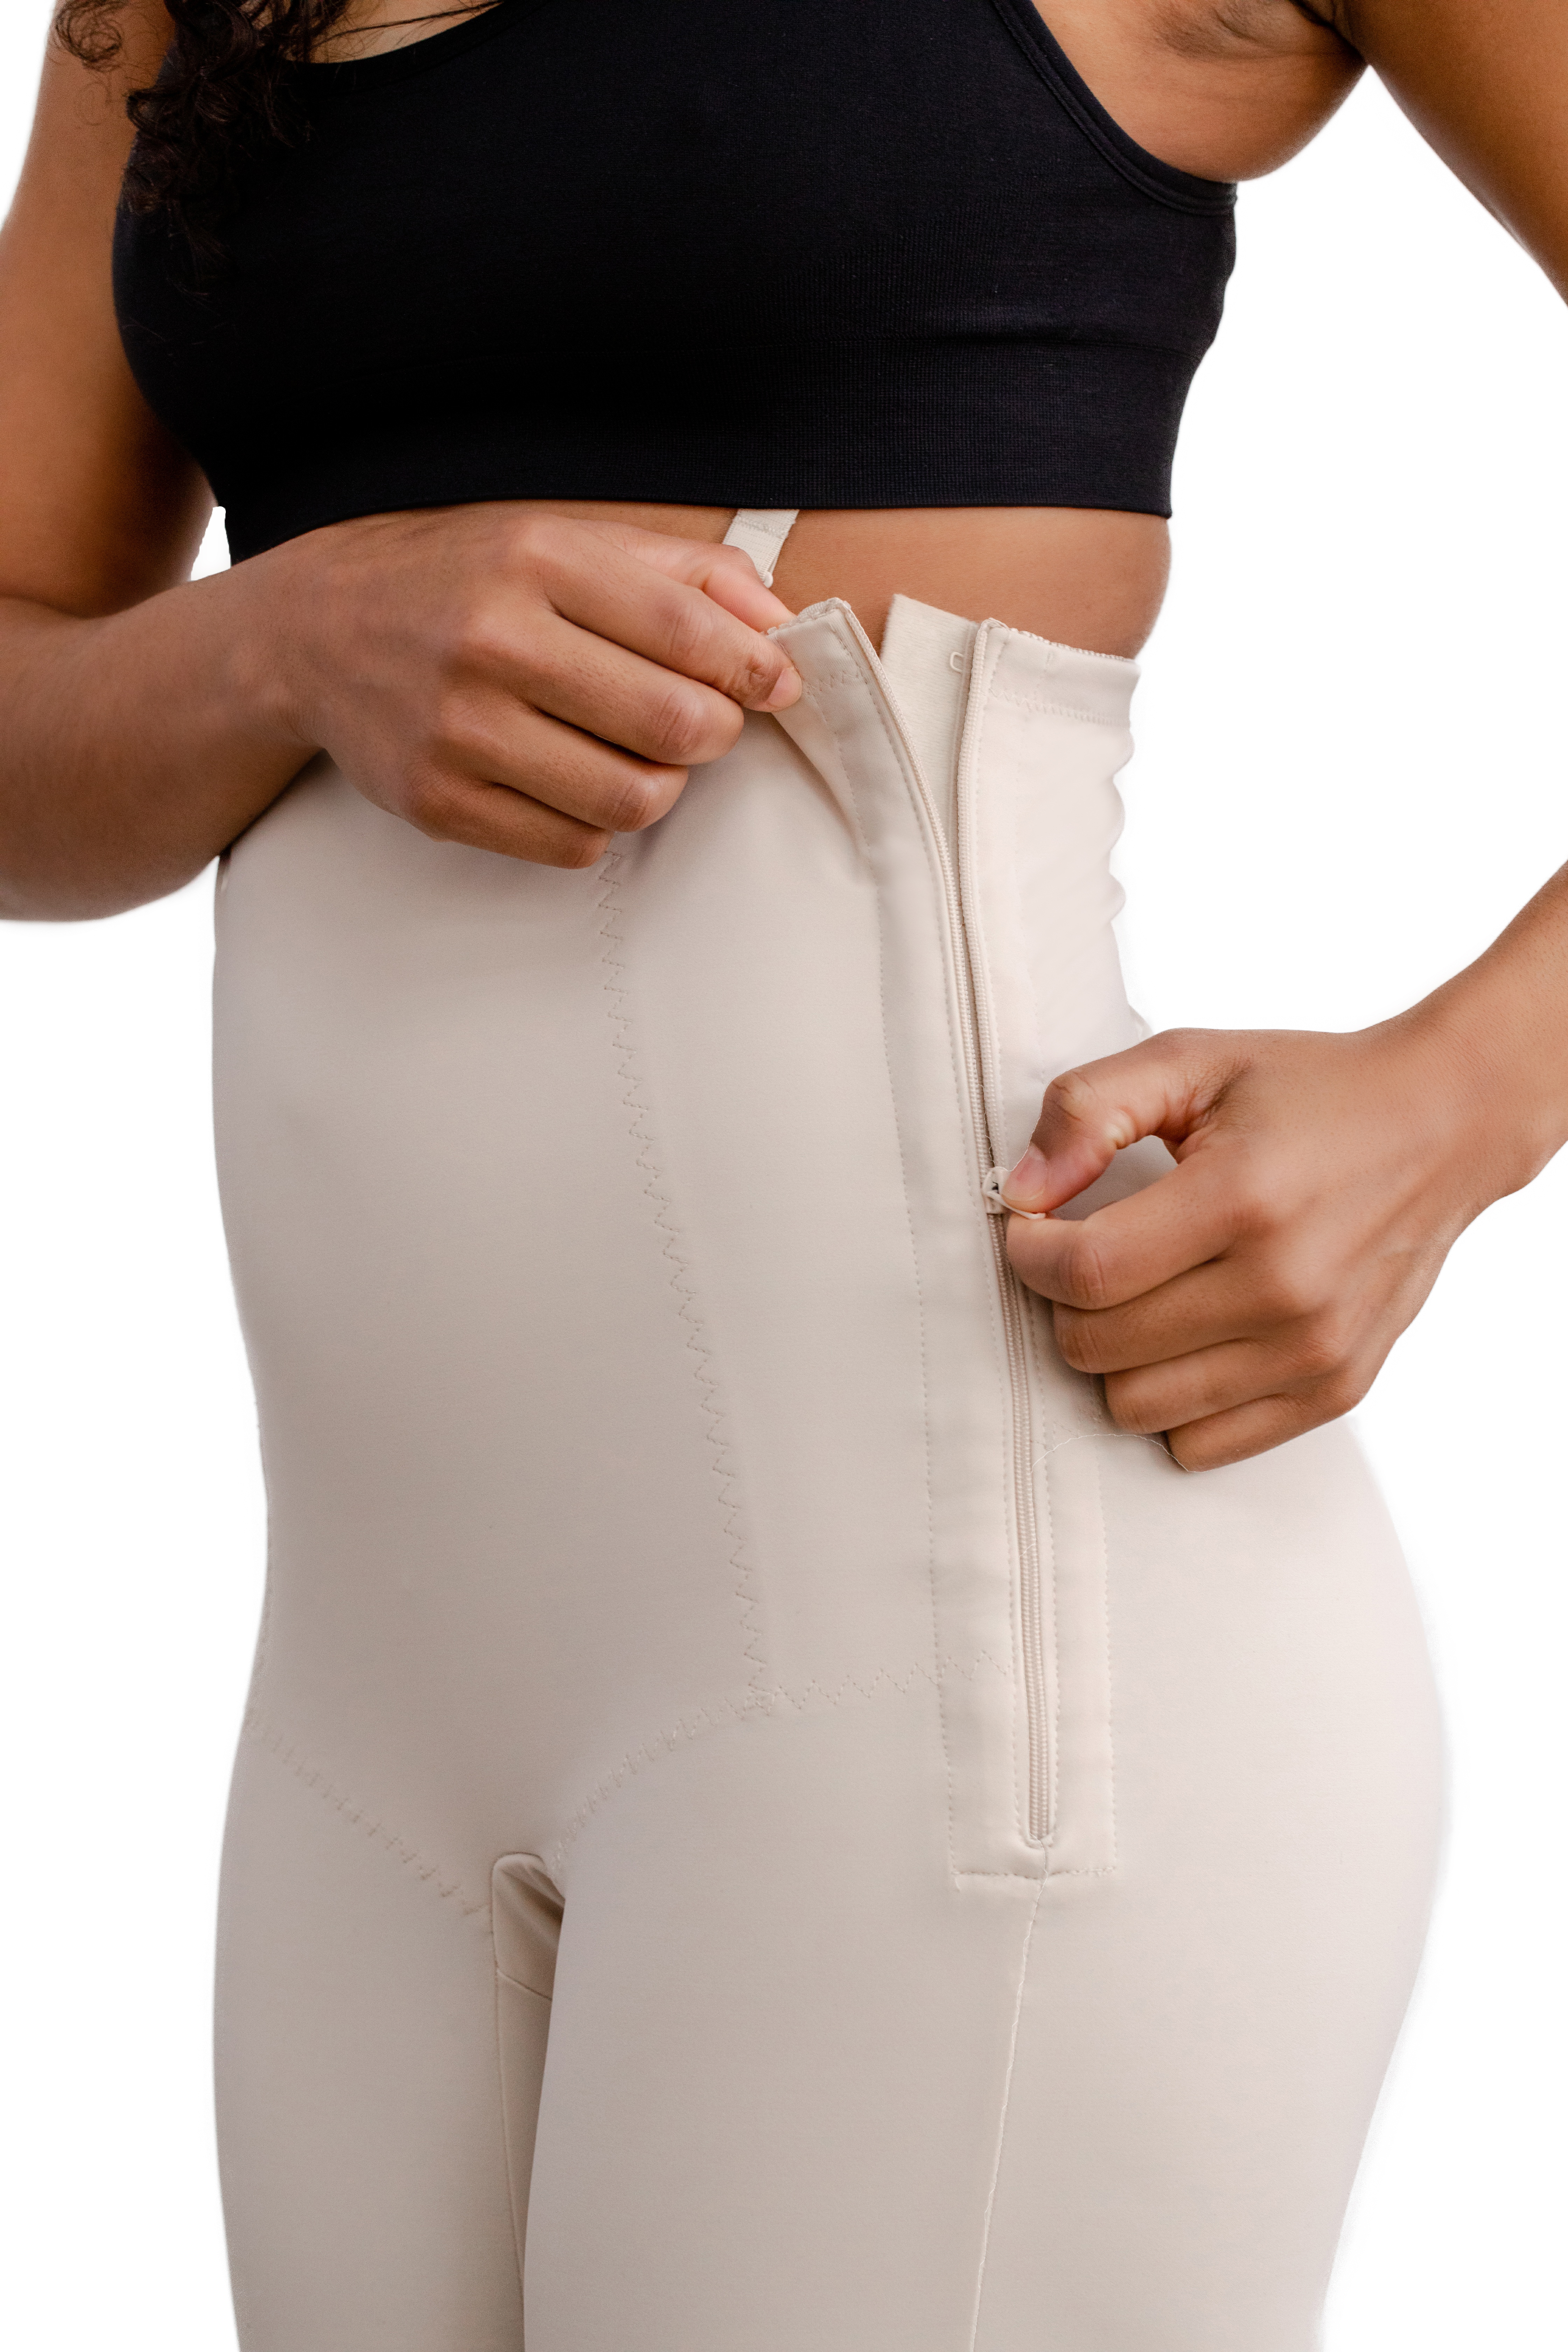 Maternity Compression Products